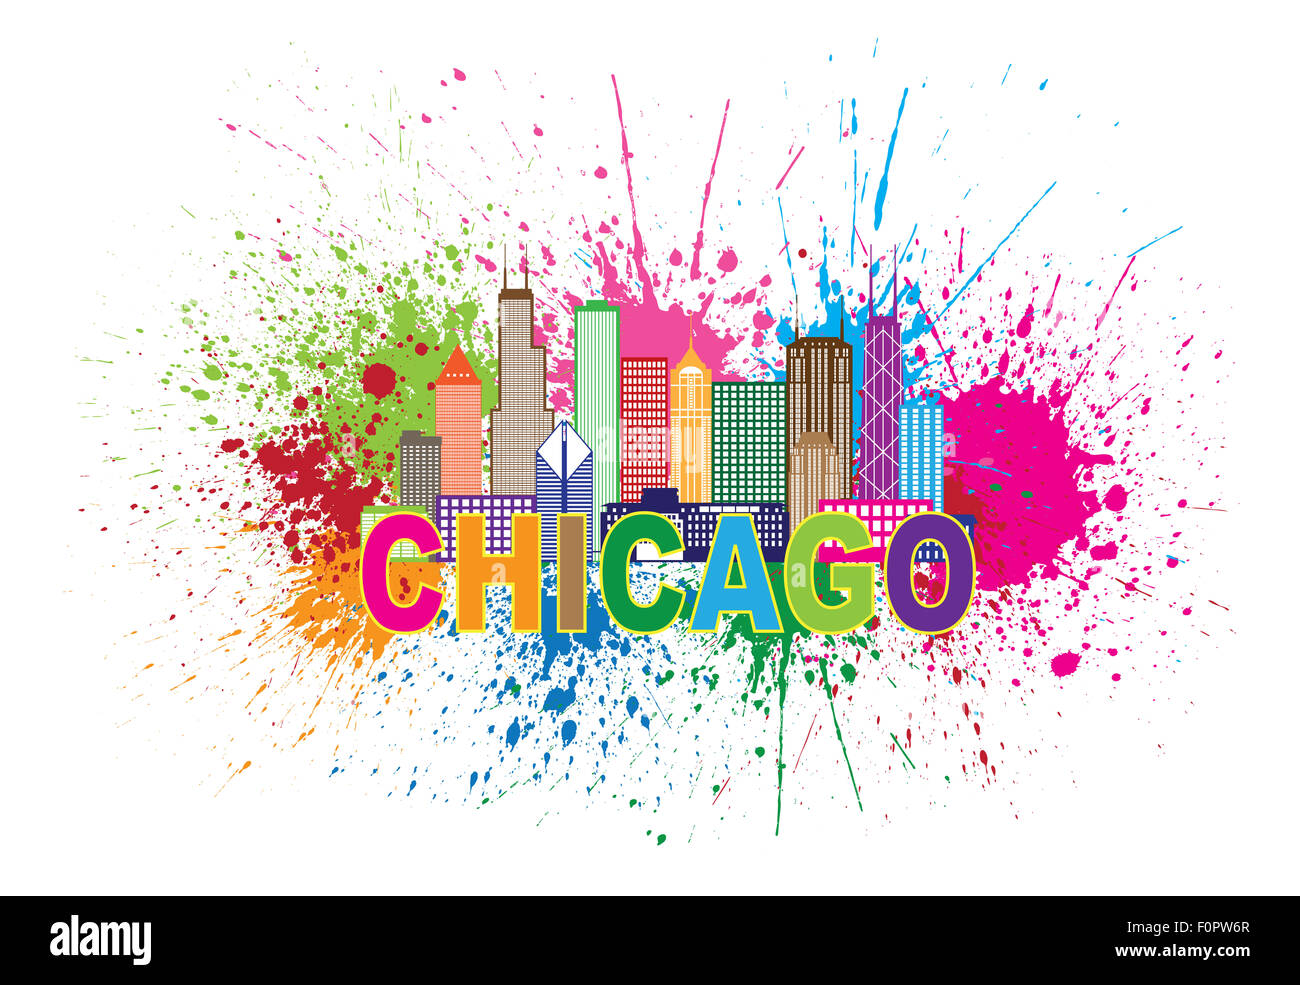 Chicago City Skyline Panorama Outline Silhouette Paint Splatter Abstract Colorful Text Isolated on White Background Illustration Stock Photo